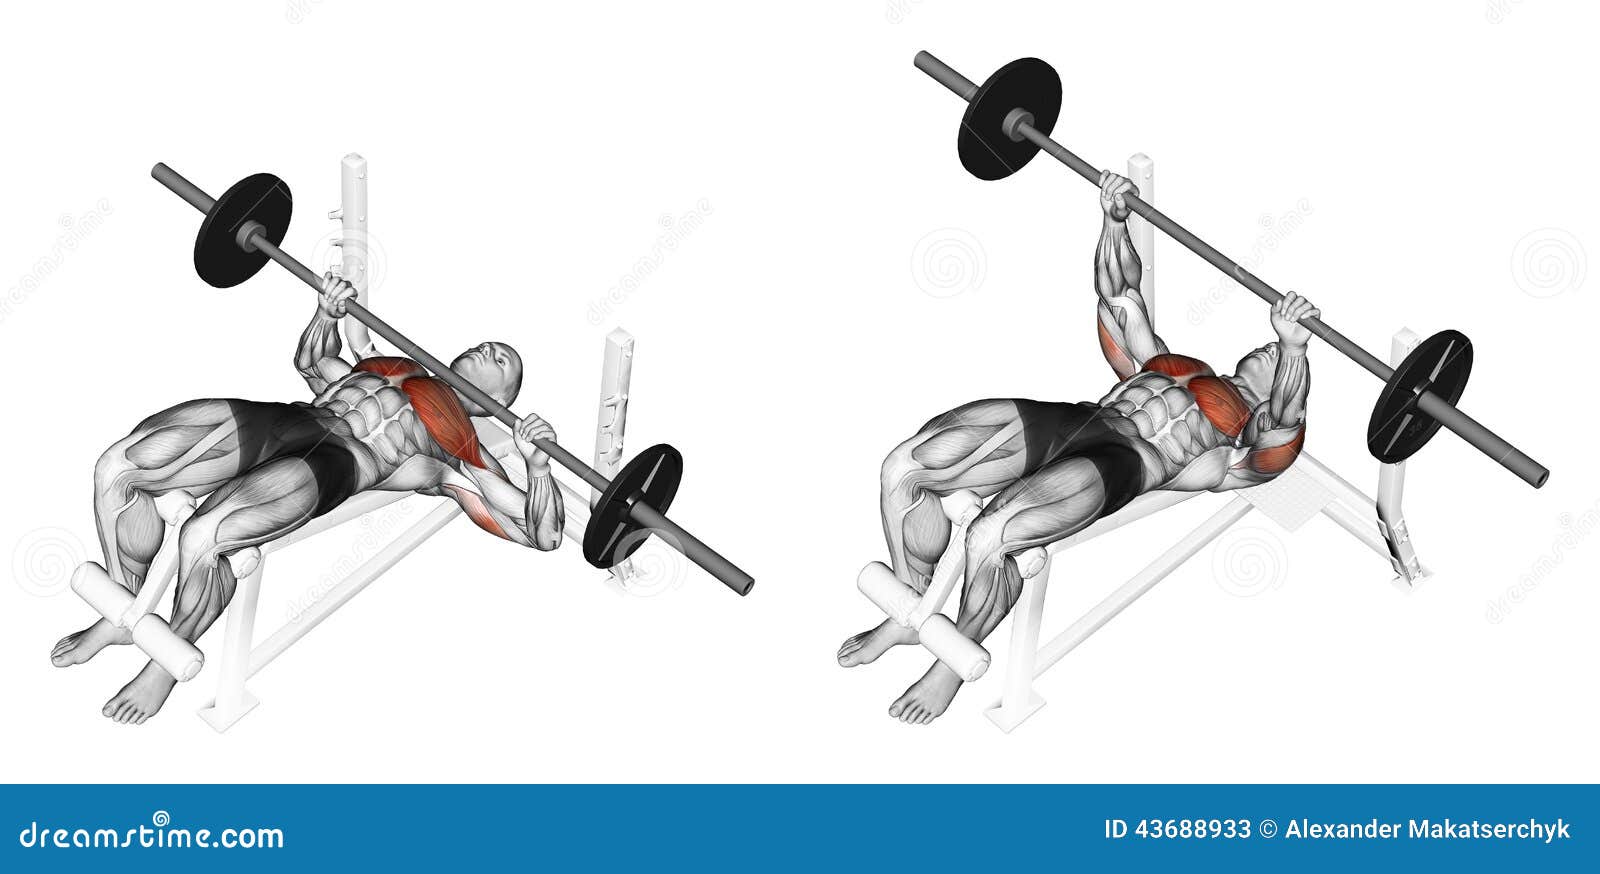 Exercising. Press Of A Bar, Lying On A Bench With Stock Illustration